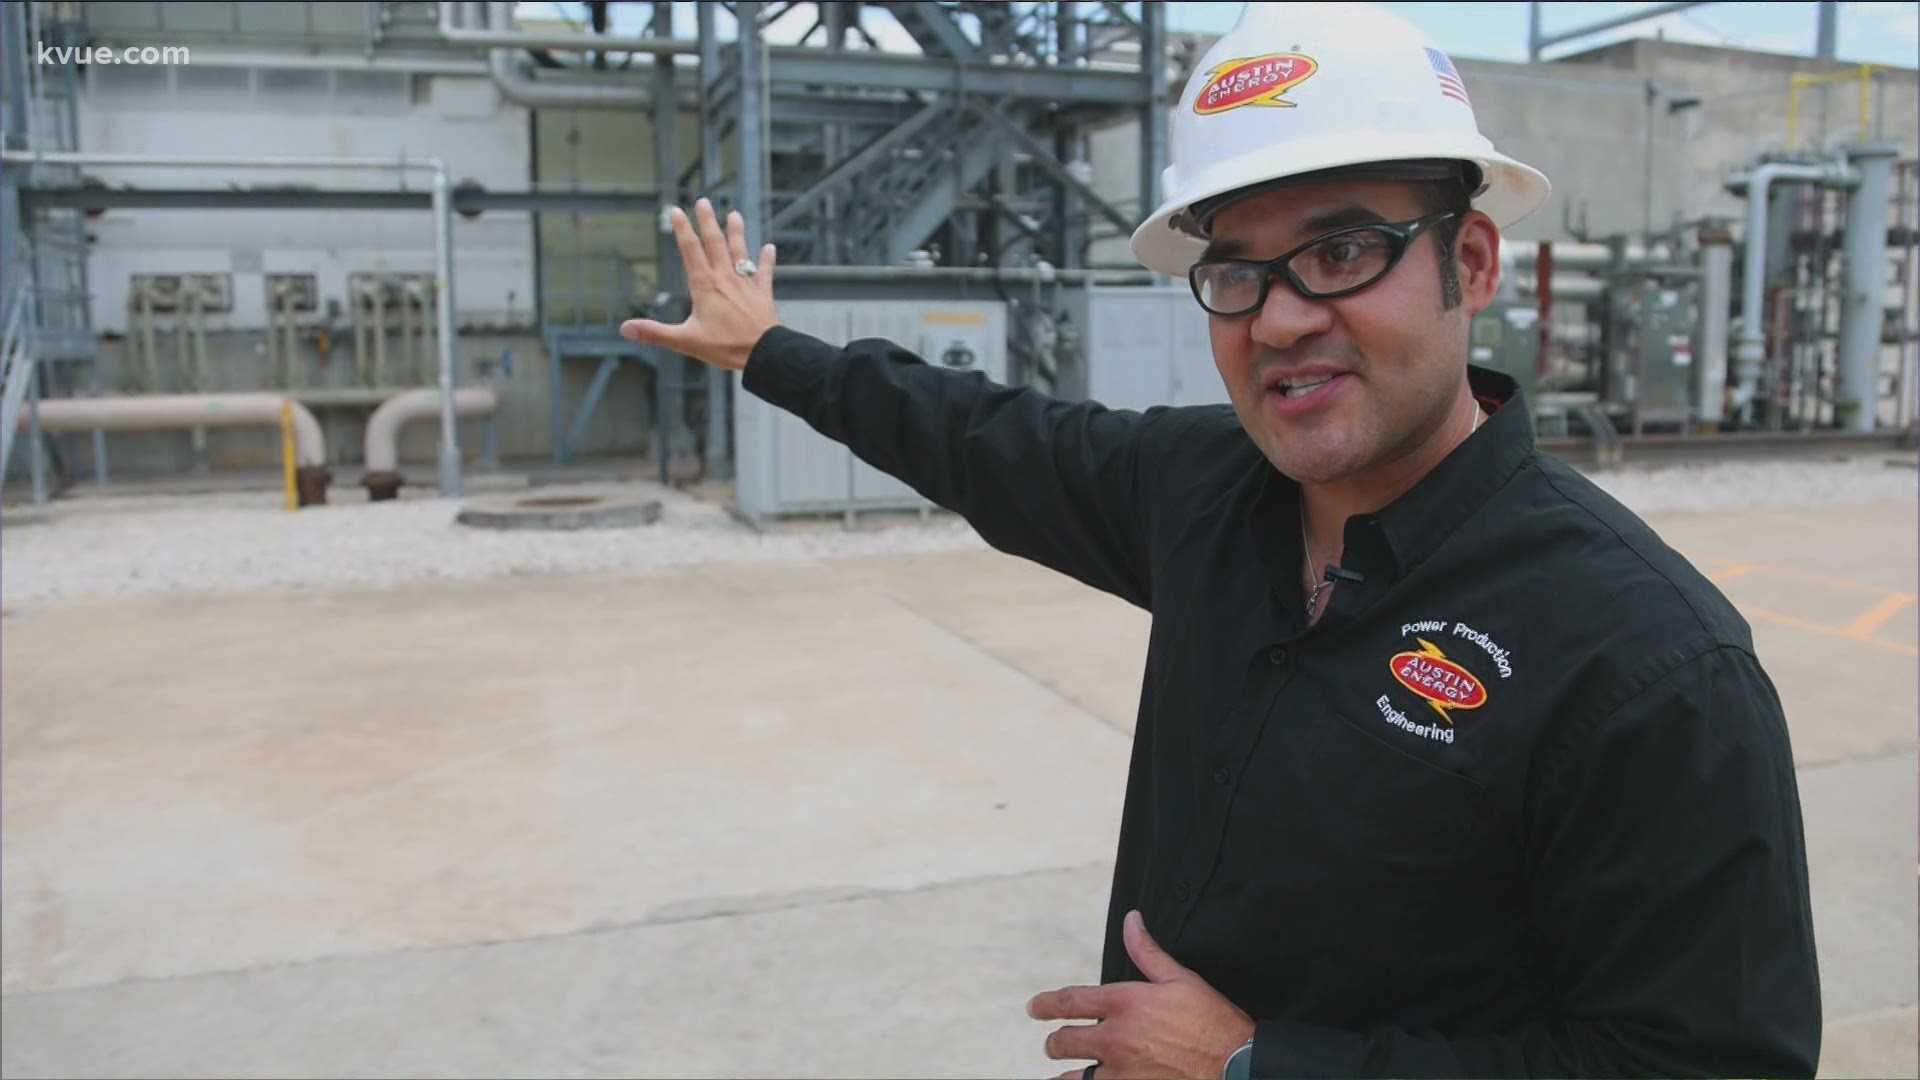 In our series on powering the Texas electricity grid, we look at how natural gas energy is made. KVUE toured two Austin power plants.